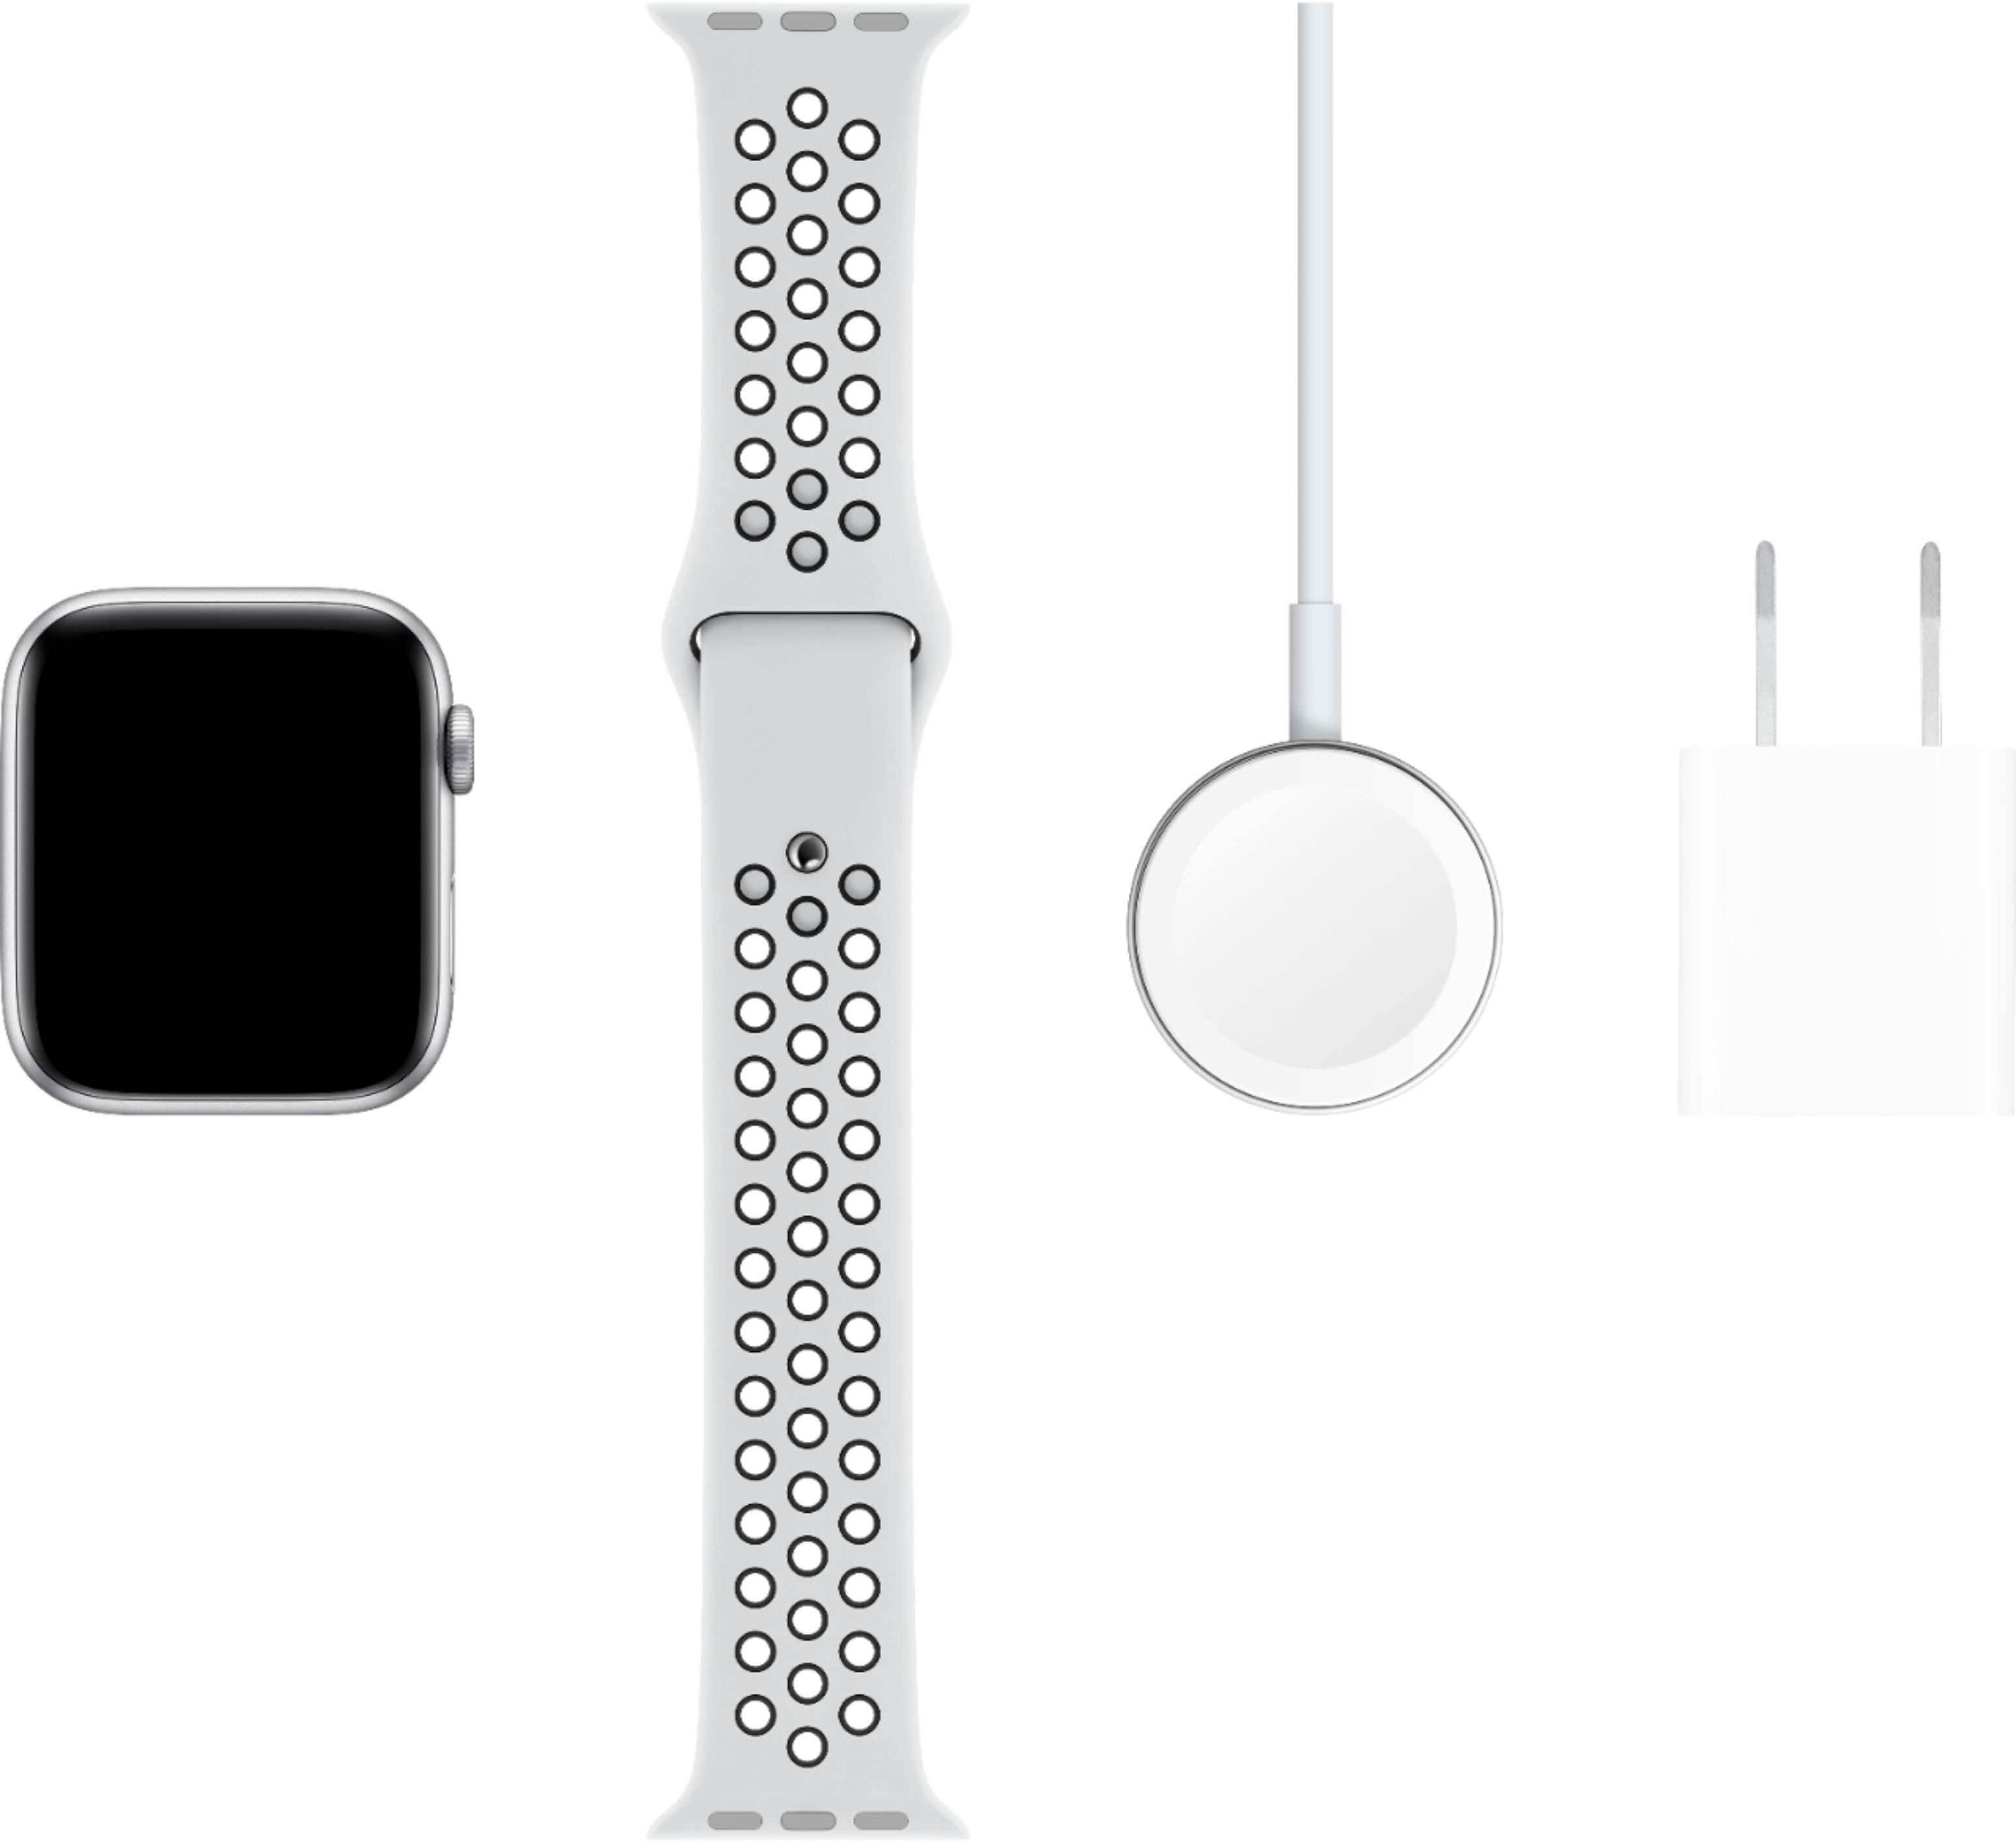 Apple Watch 5 Nike edition clearance - save $105 right now